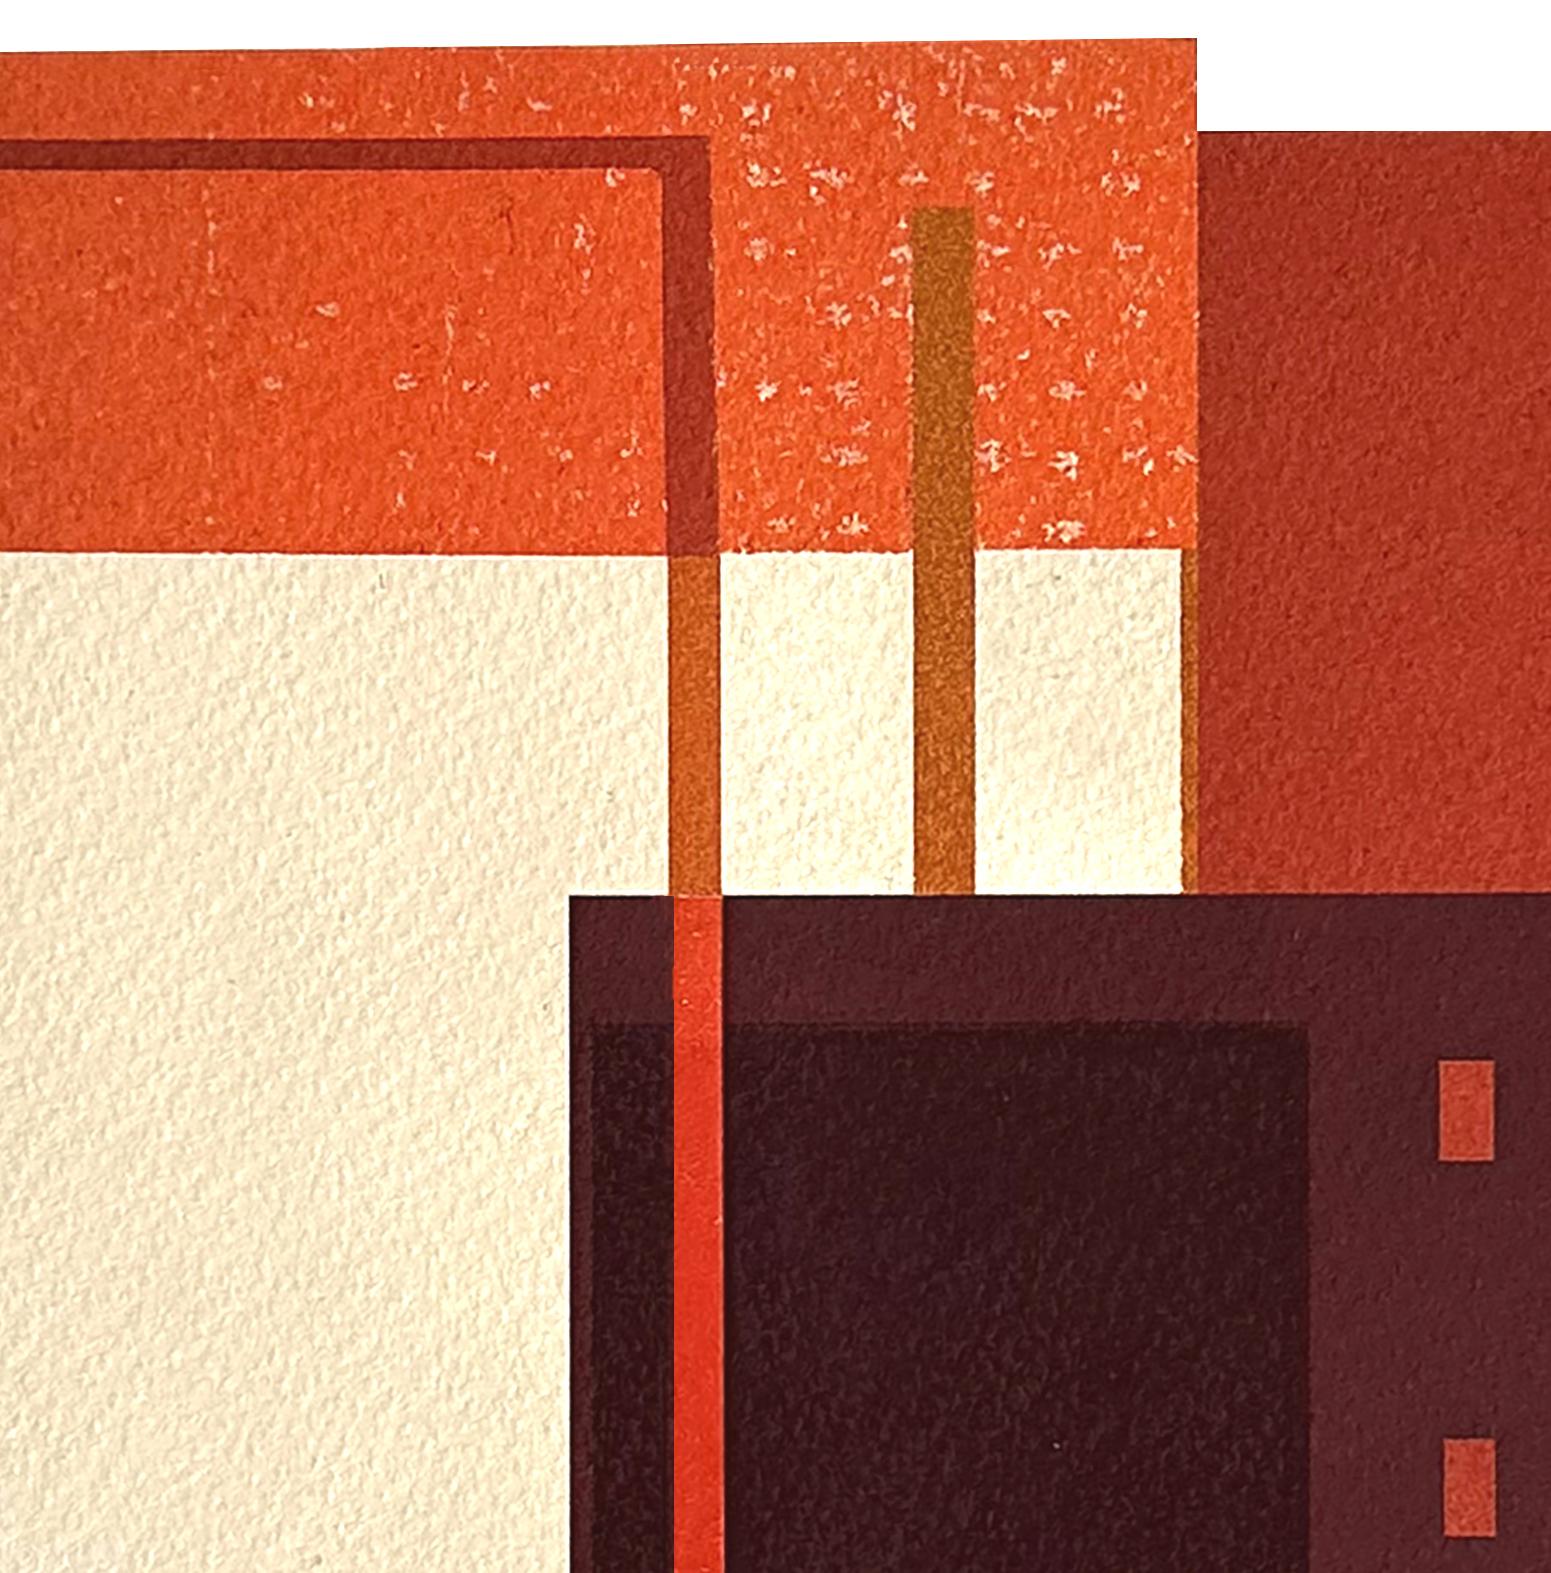 Building V: modernist city architecture collage on monoprint in red, unframed - Art by Agathe Bouton